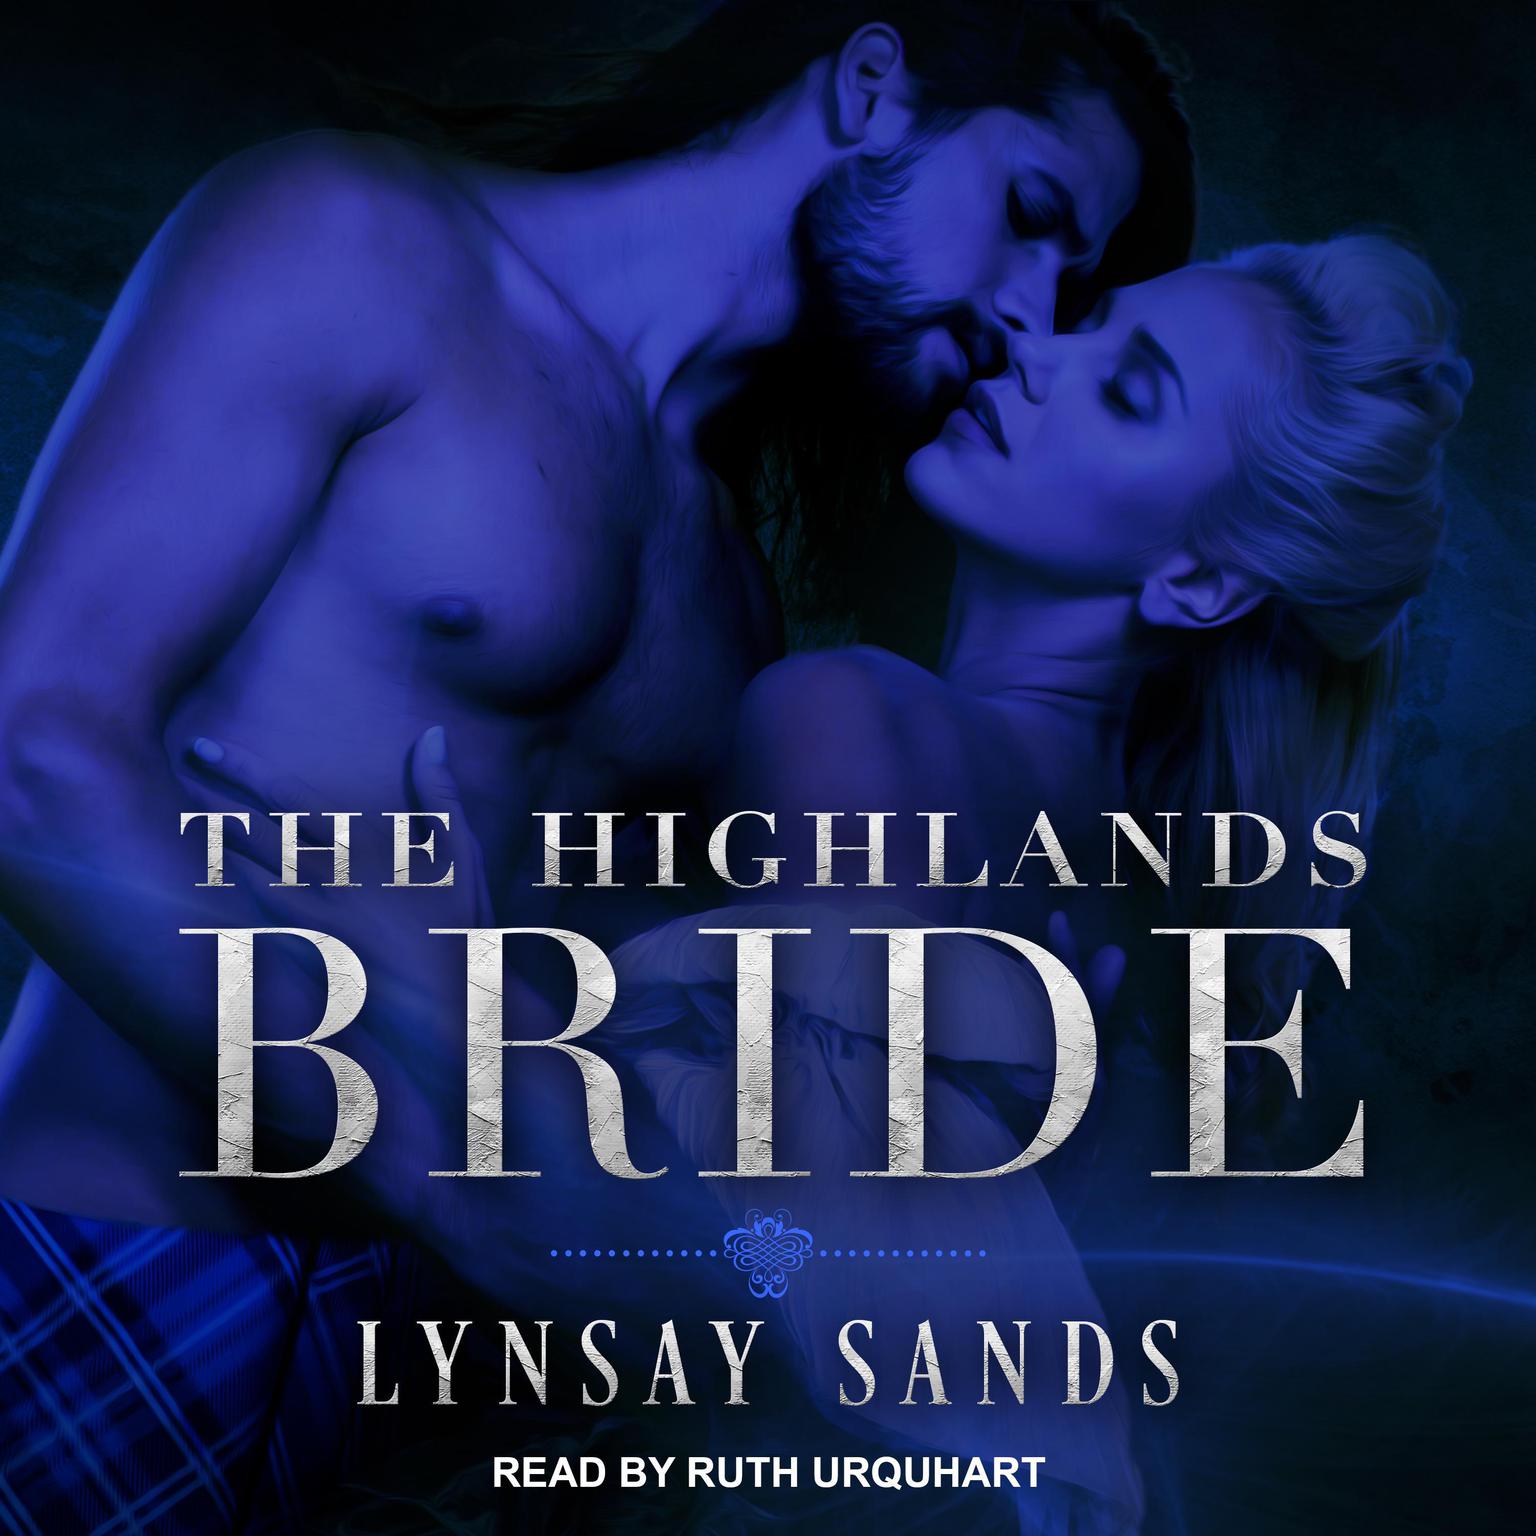 The Highlands Bride Audiobook, by Lynsay Sands